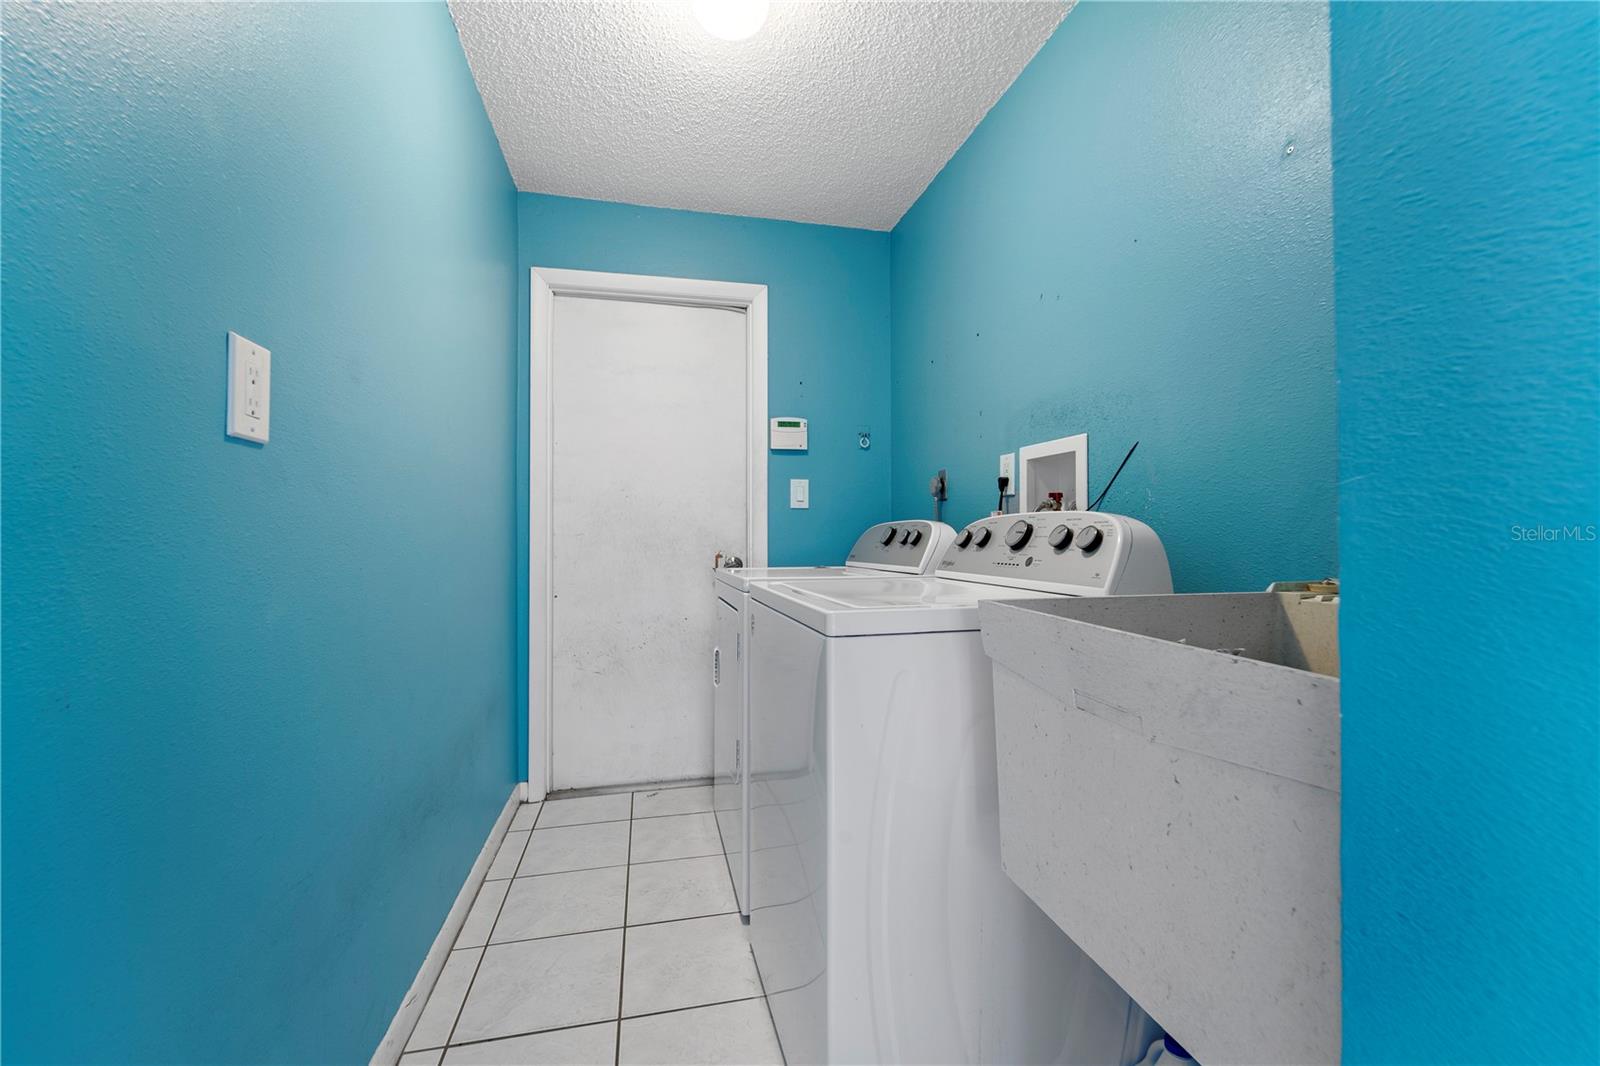 LAUNDRY ROOM WITH UTILITY SINK